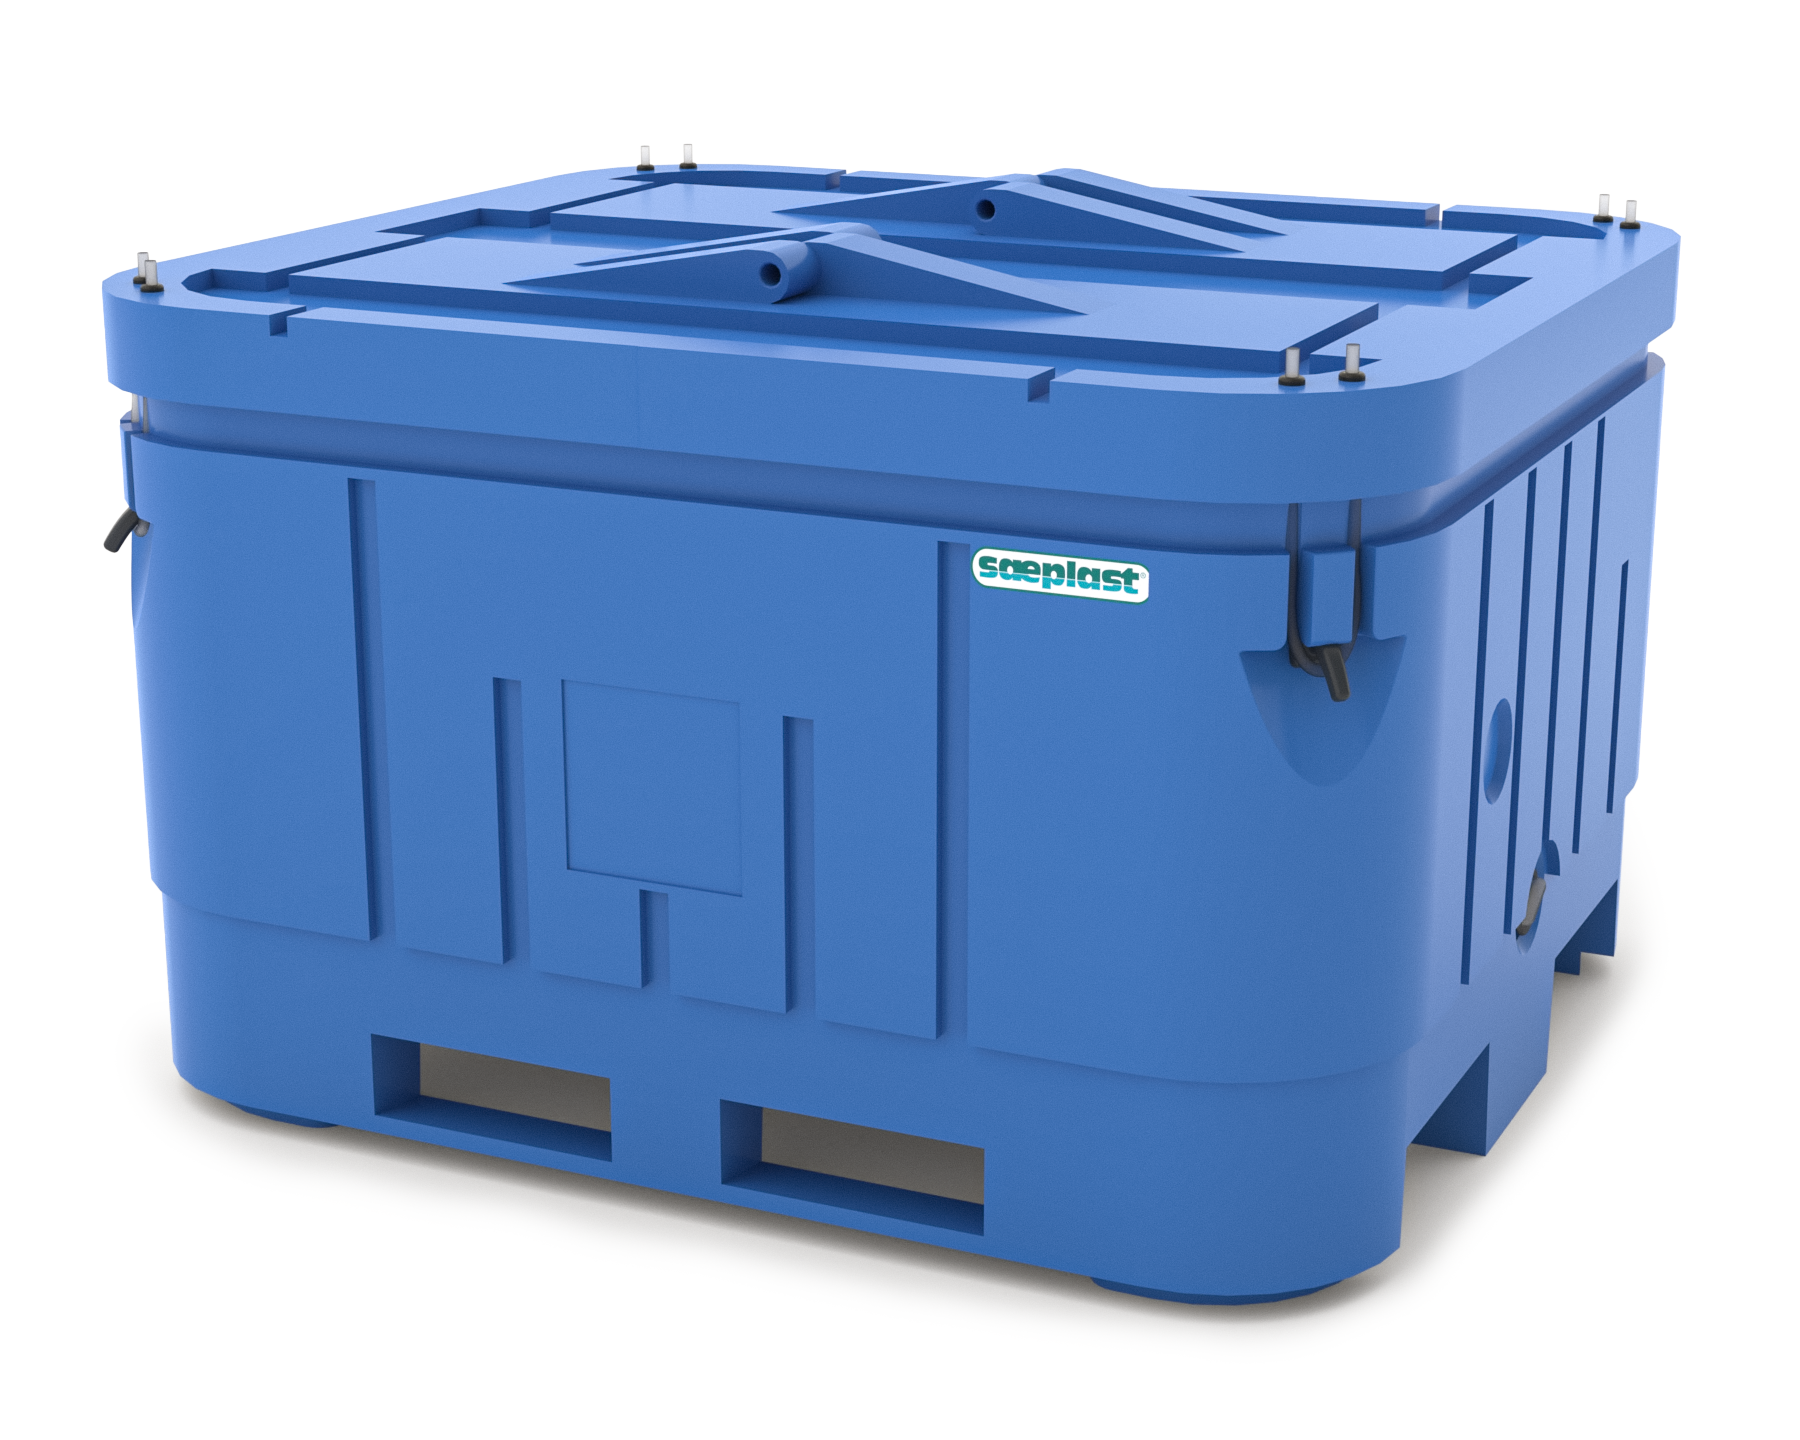 Insulated Seafood Container  Sæplast - Insulated tubs and pallets.